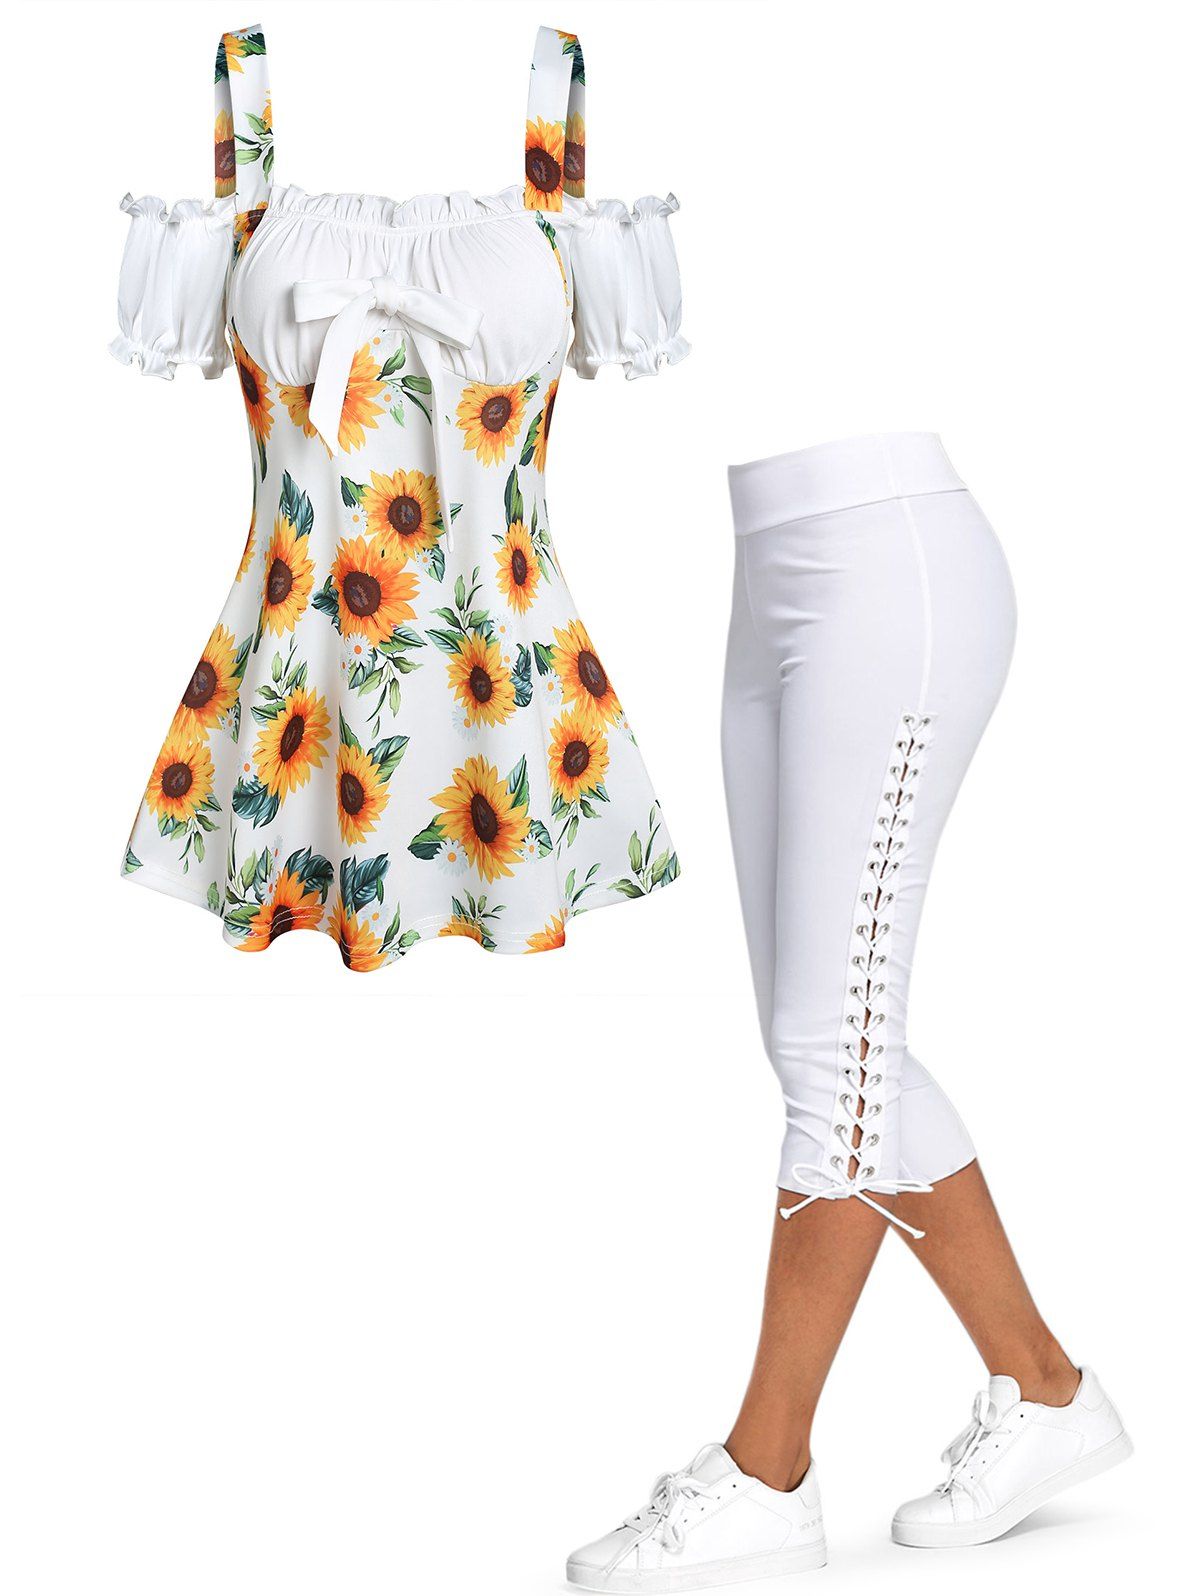 Sunflower Print Bowknot Ruffle Cold Shoulder 2 In 1 T Shirt and Solid Color Lace Up Skinny Crop Leggings Summer Casual Outfit - multicolor S